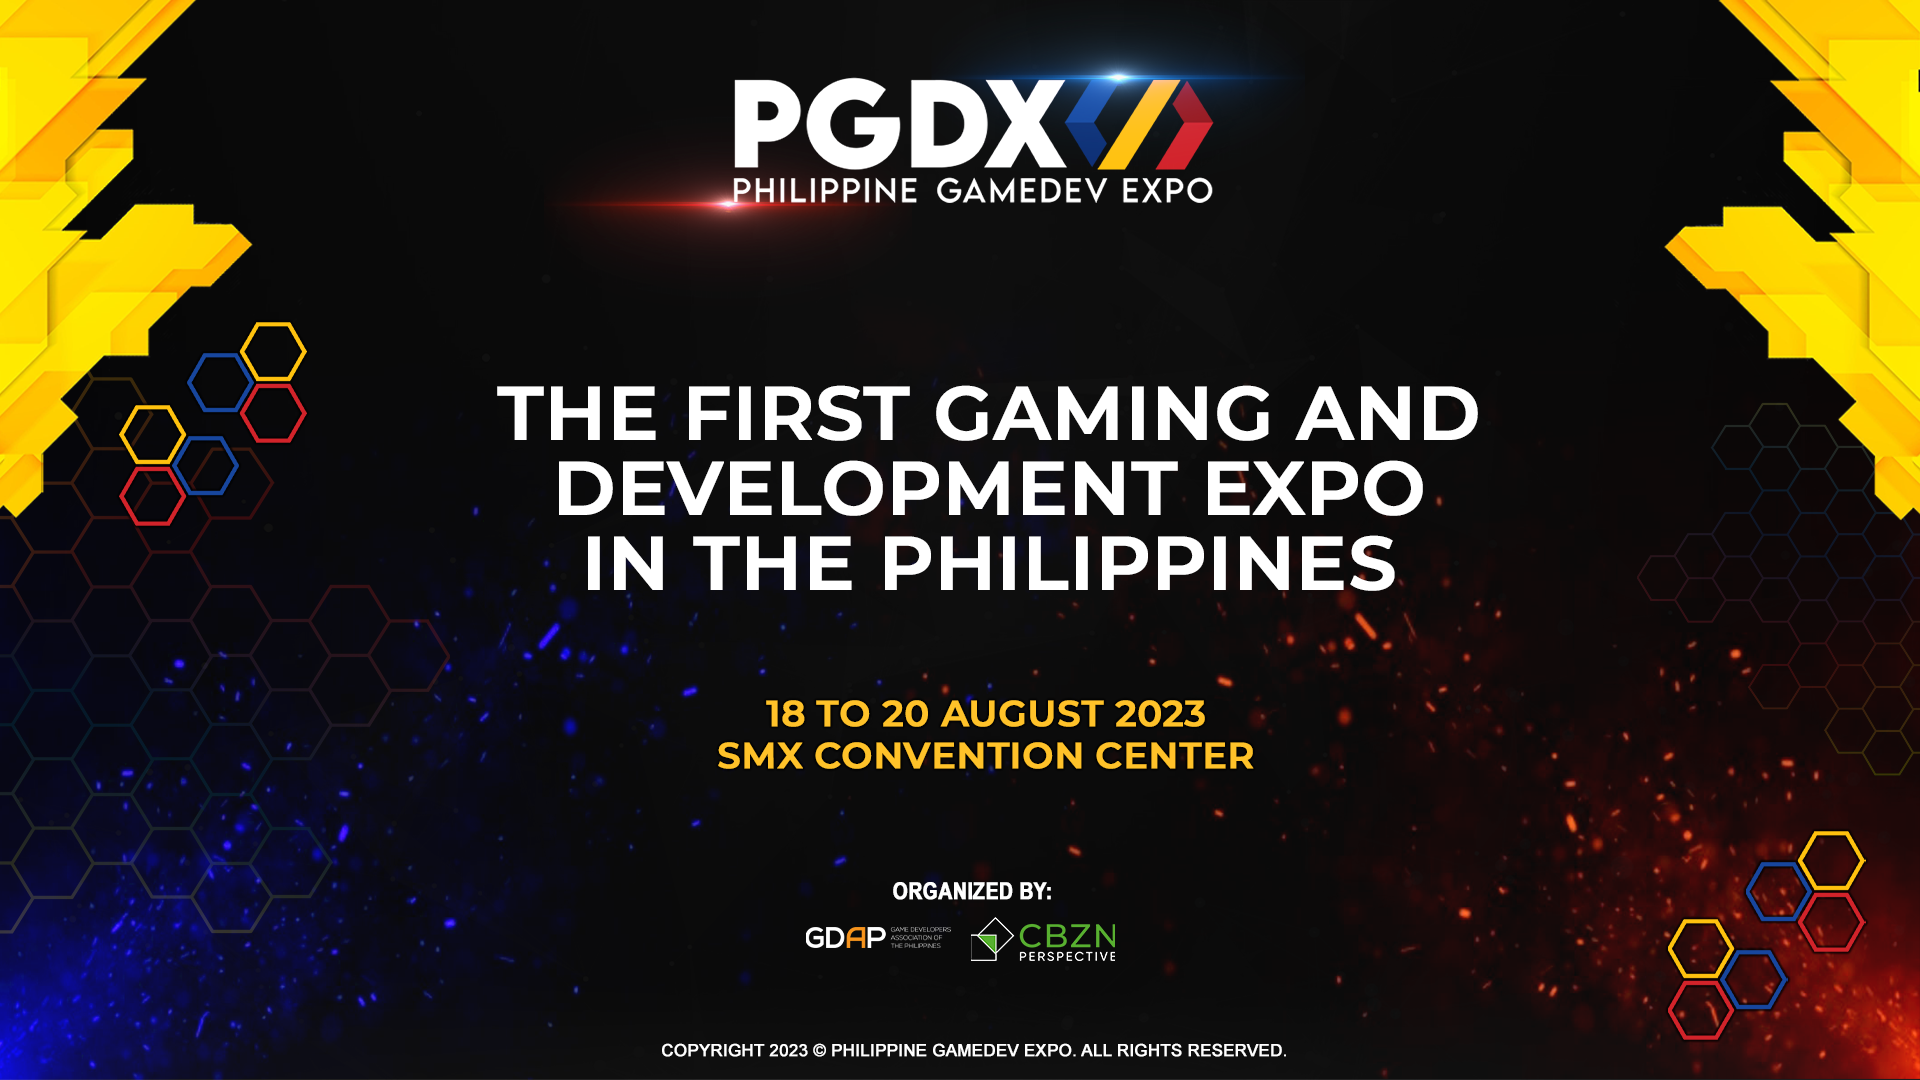 Philippine GameDev Expo on August 18-20